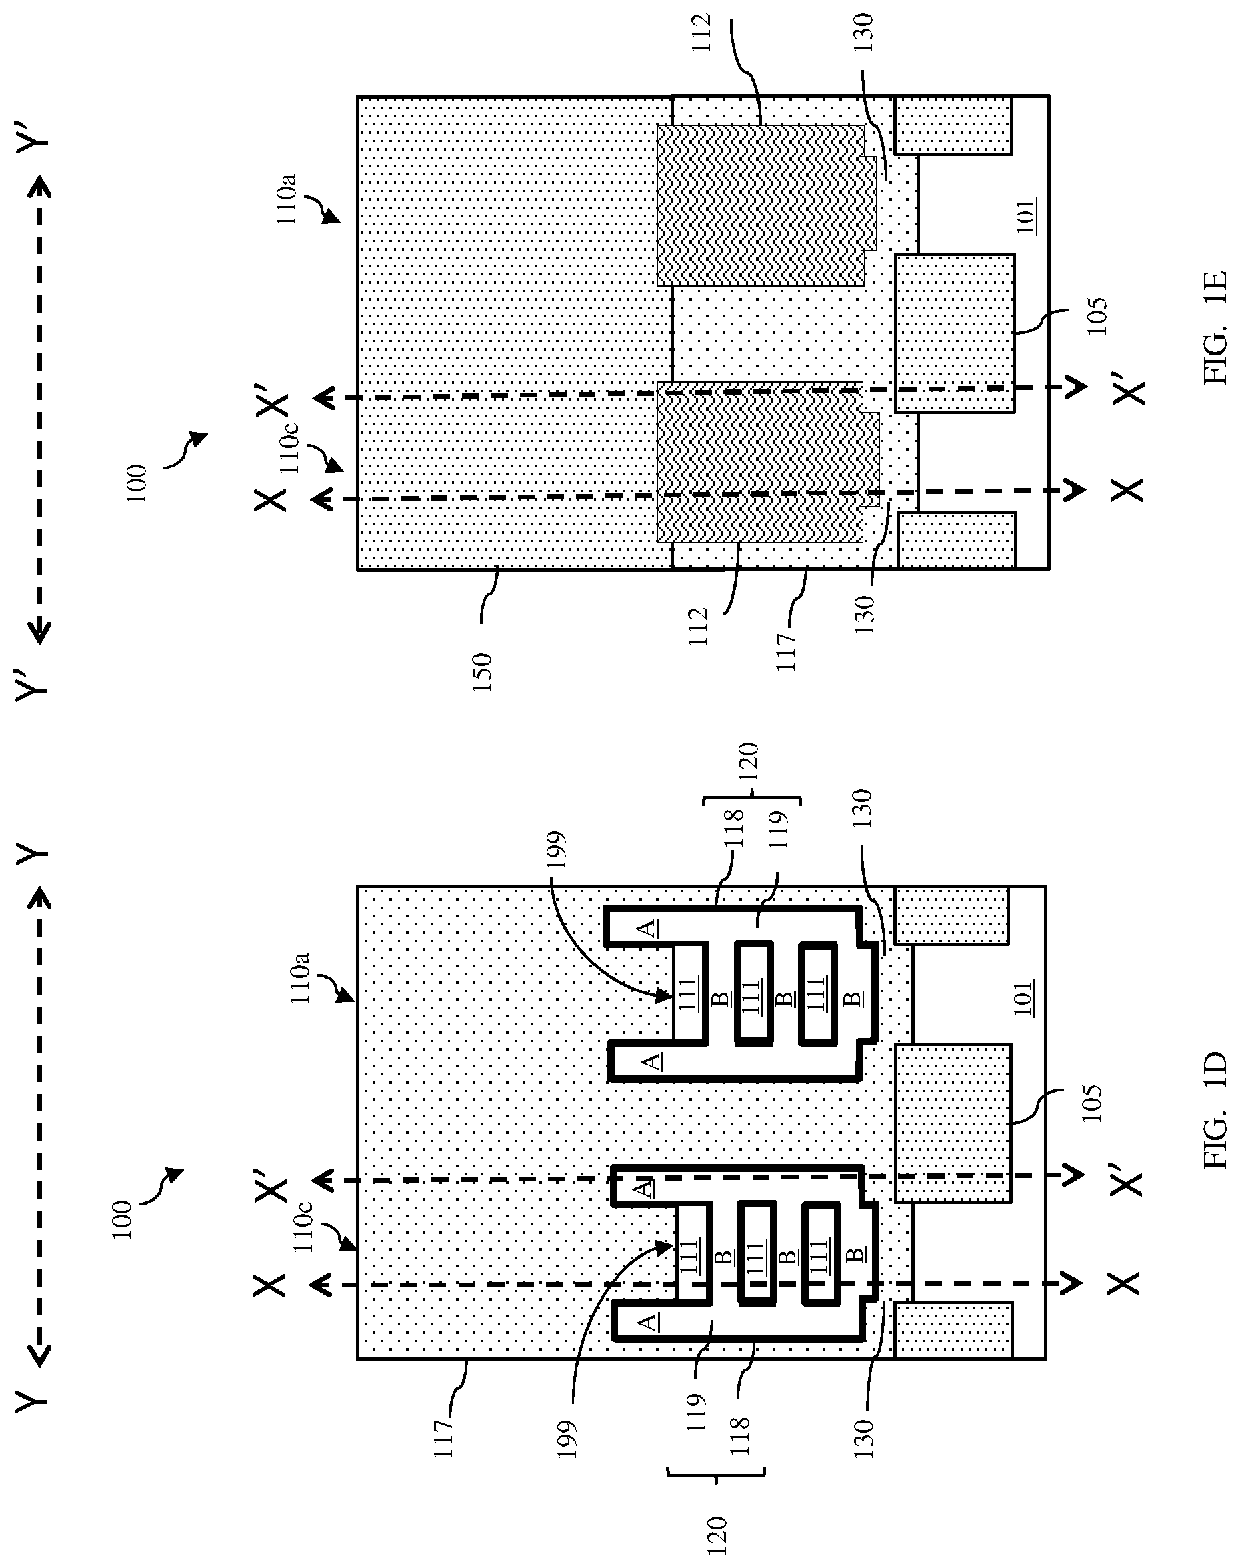 Gate-all-around field effect transistors with air-gap inner spacers and methods